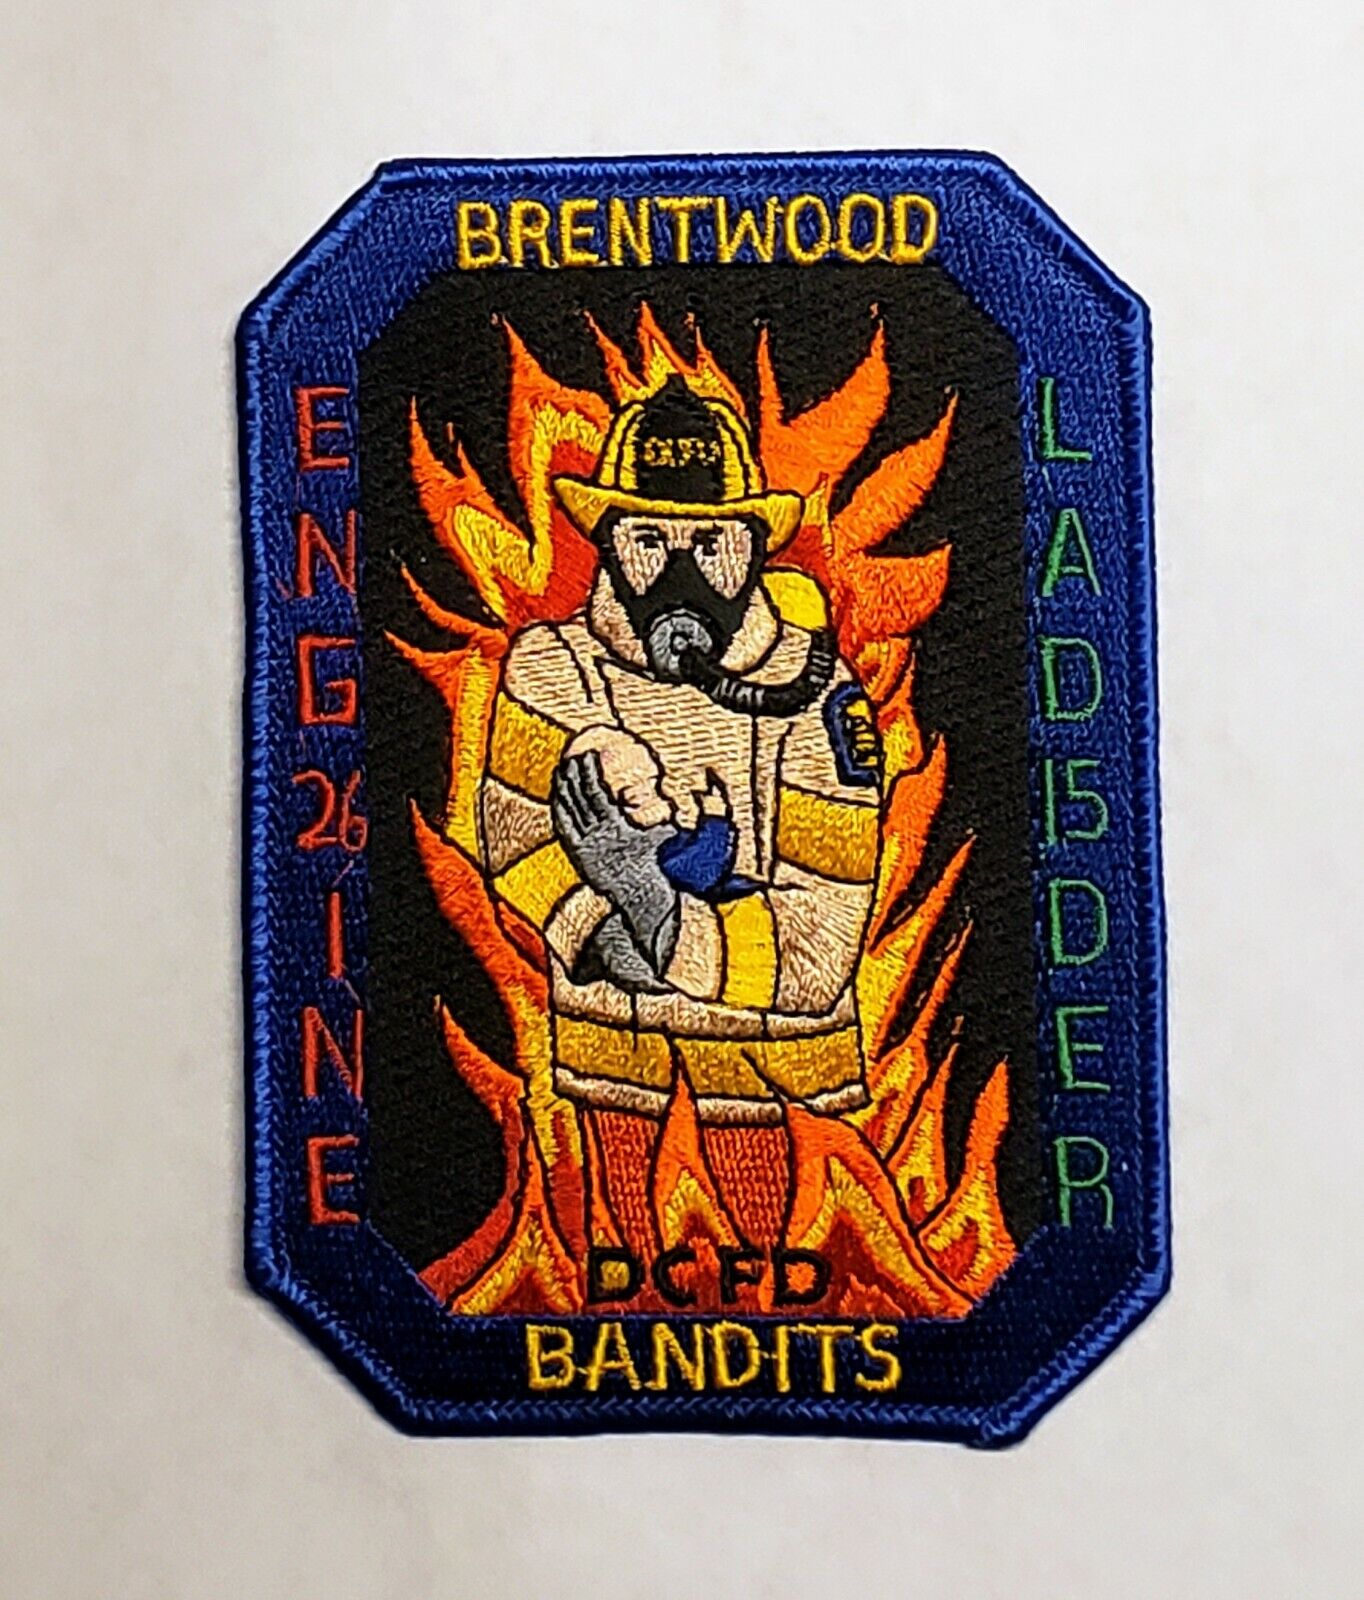 Fire Patch DCFD Brentwood Bandits Engine 26 Truck 15 washington dc novelty